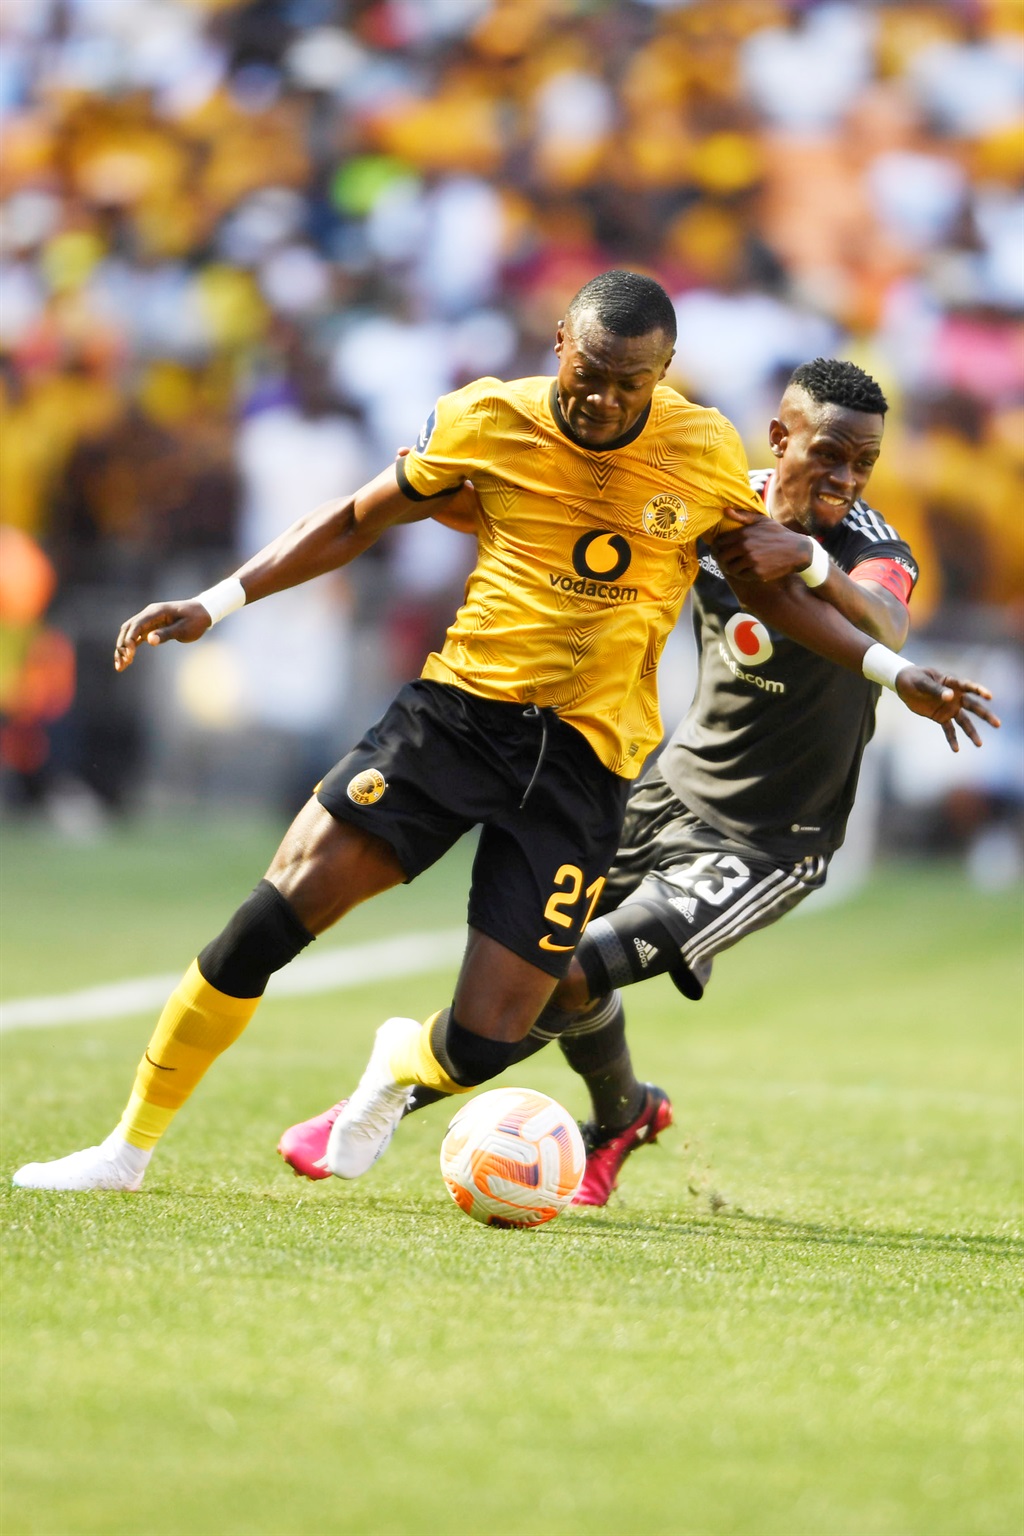 JOHANNESBURG, SOUTH AFRICA - FEBRUARY 25: Christian Saile of Kaizer Chiefs and Innocent Maela of Orlando Pirates during the DStv Premiership match between Kaizer Chiefs and Orlando Pirates at FNB Stadium on February 25, 2023 in Johannesburg, South Africa. (Photo by Lefty Shivambu/Gallo Images)